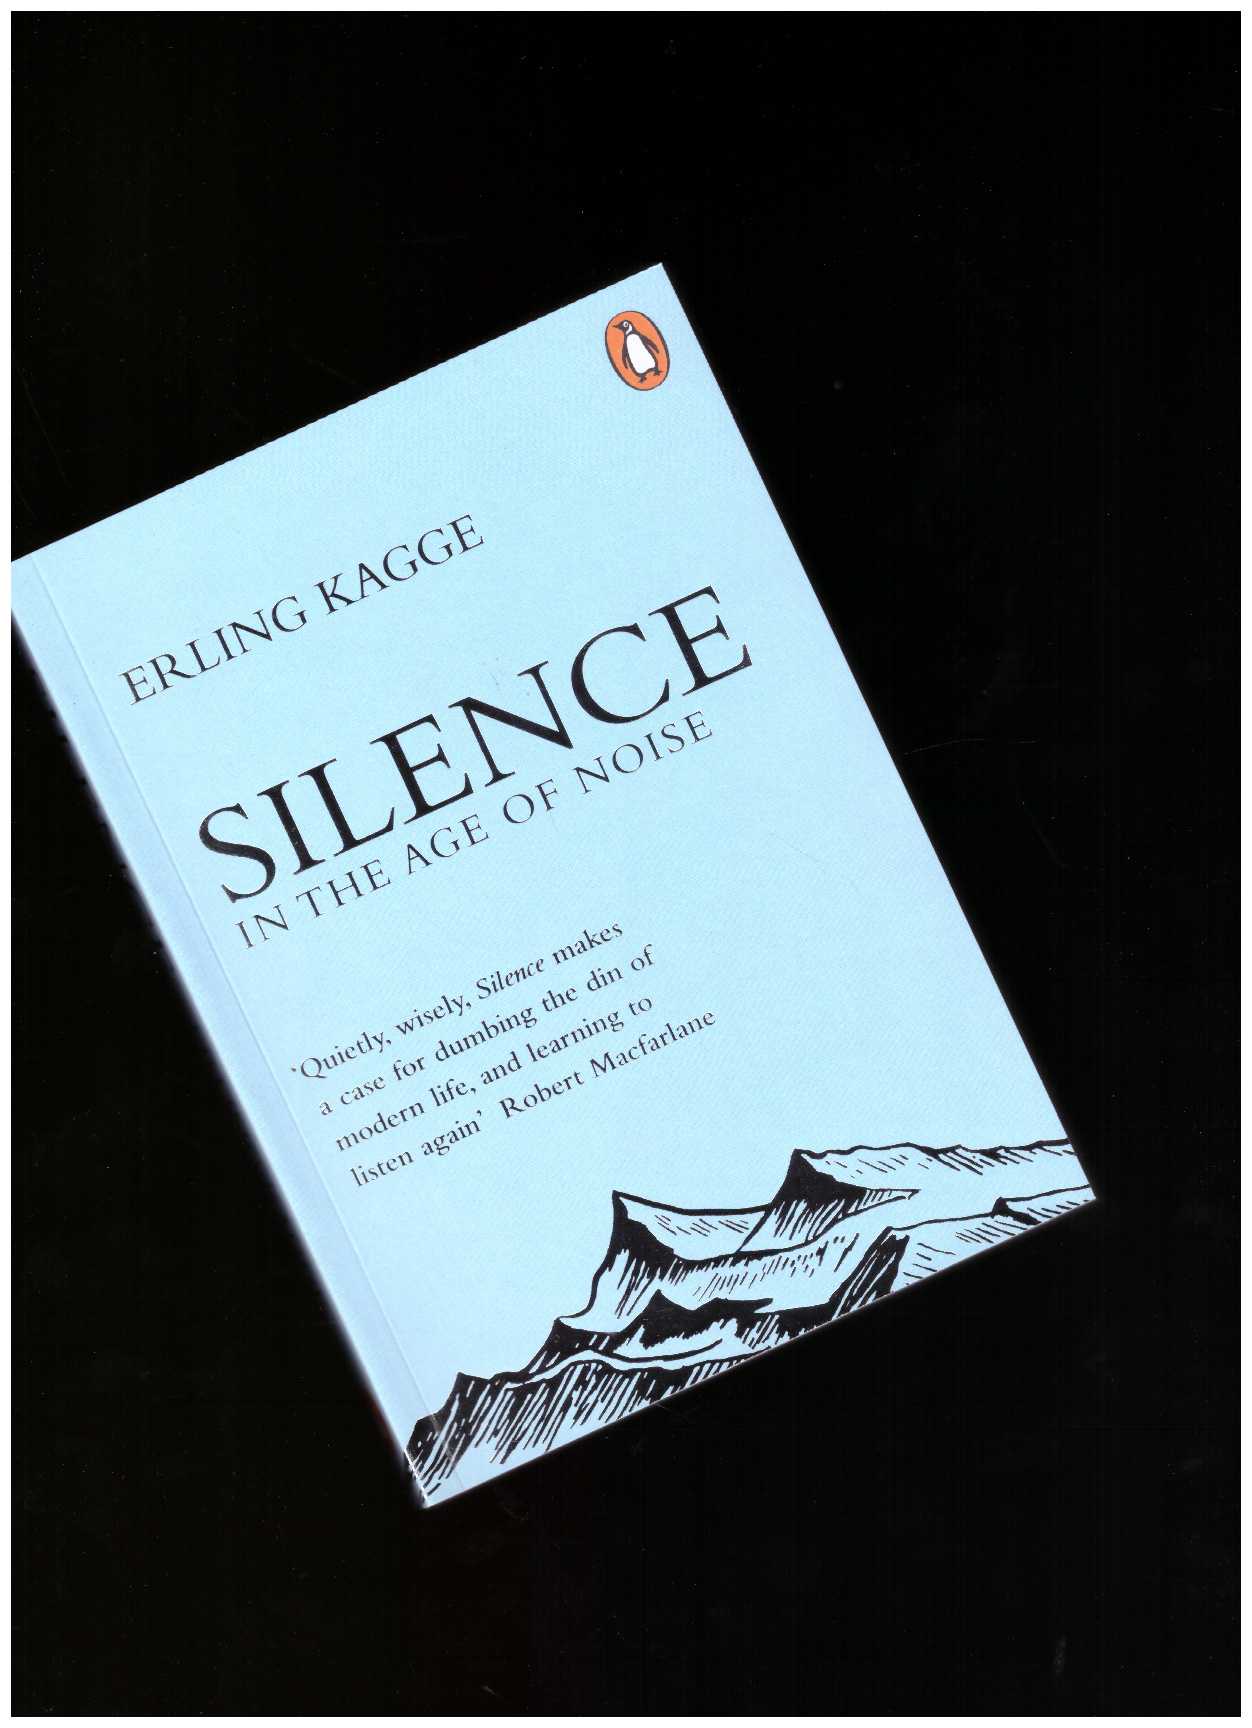 KAGGE, Erling - Silence. In the Age of Noise